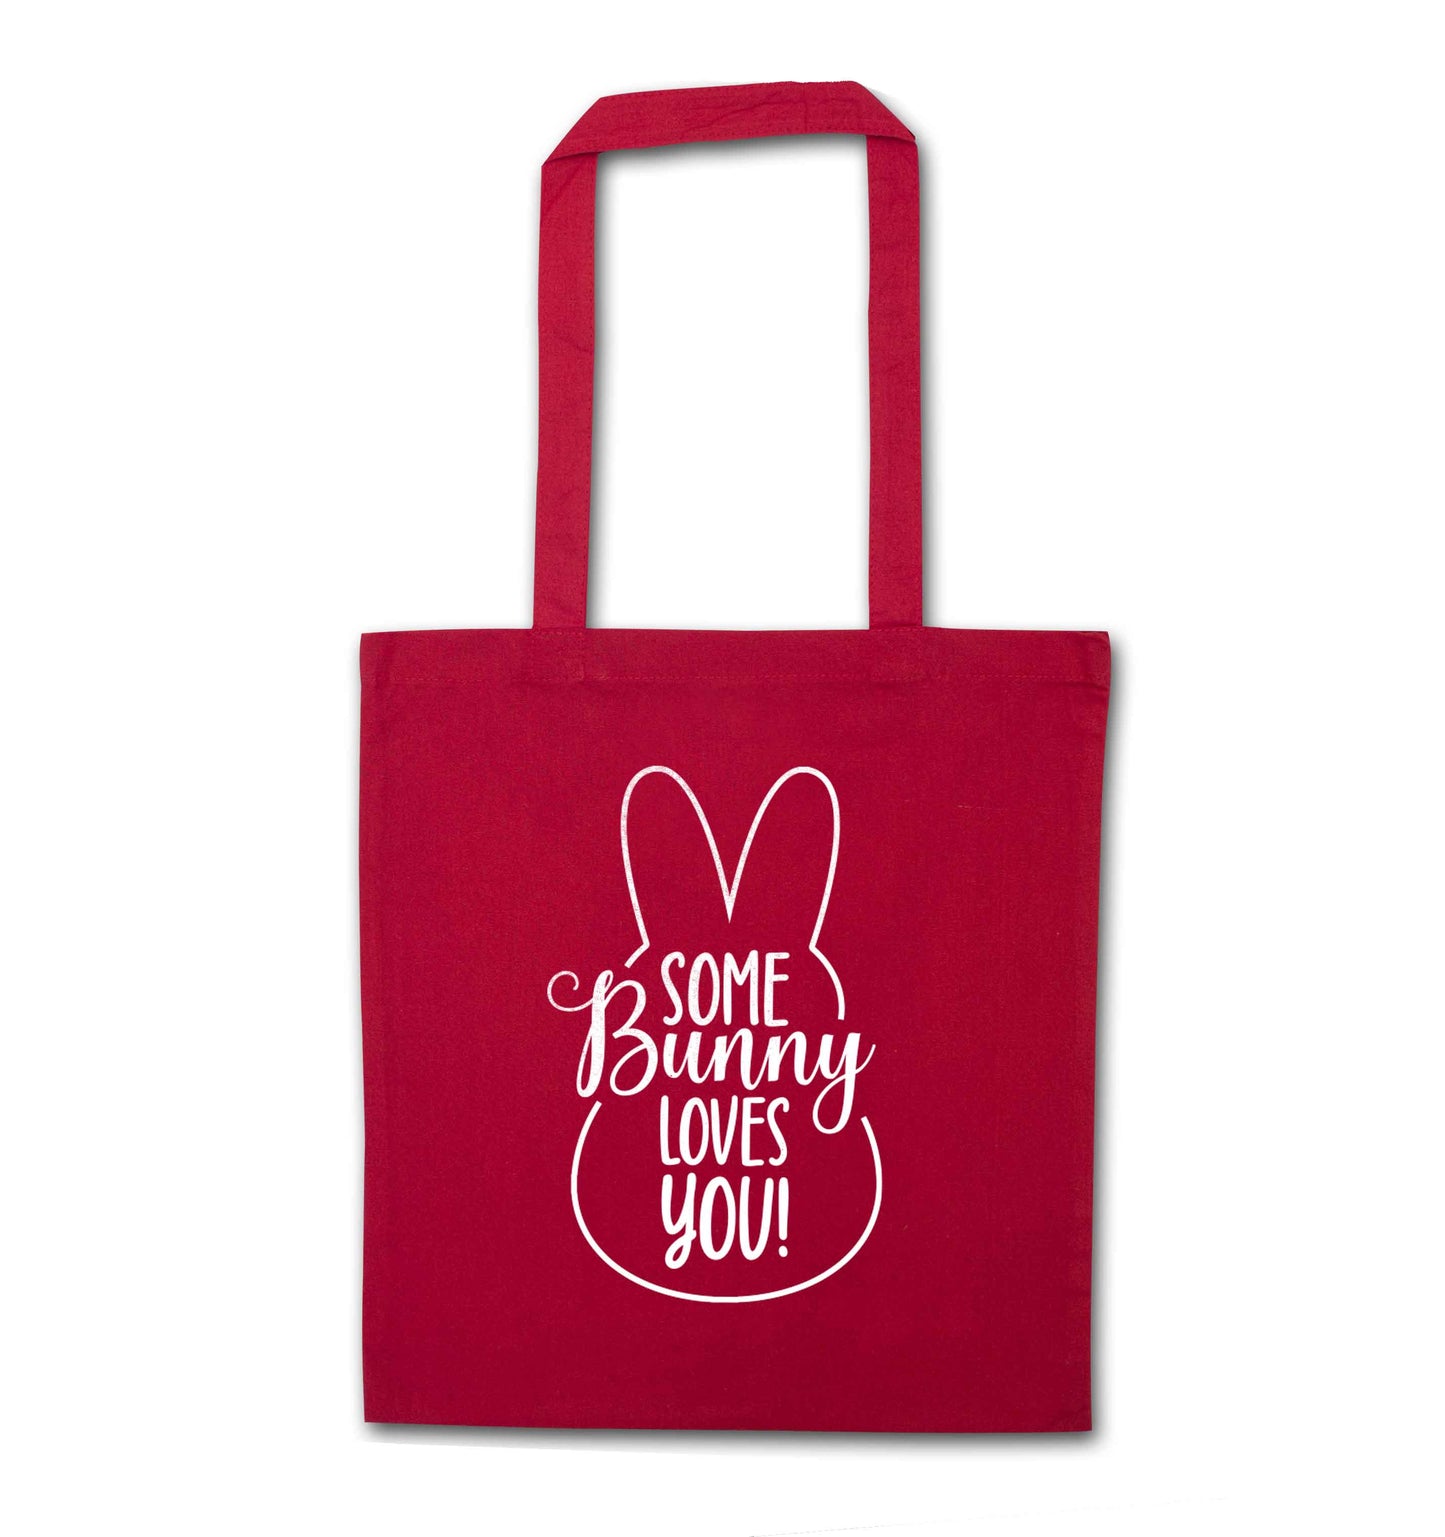 Some bunny loves you red tote bag